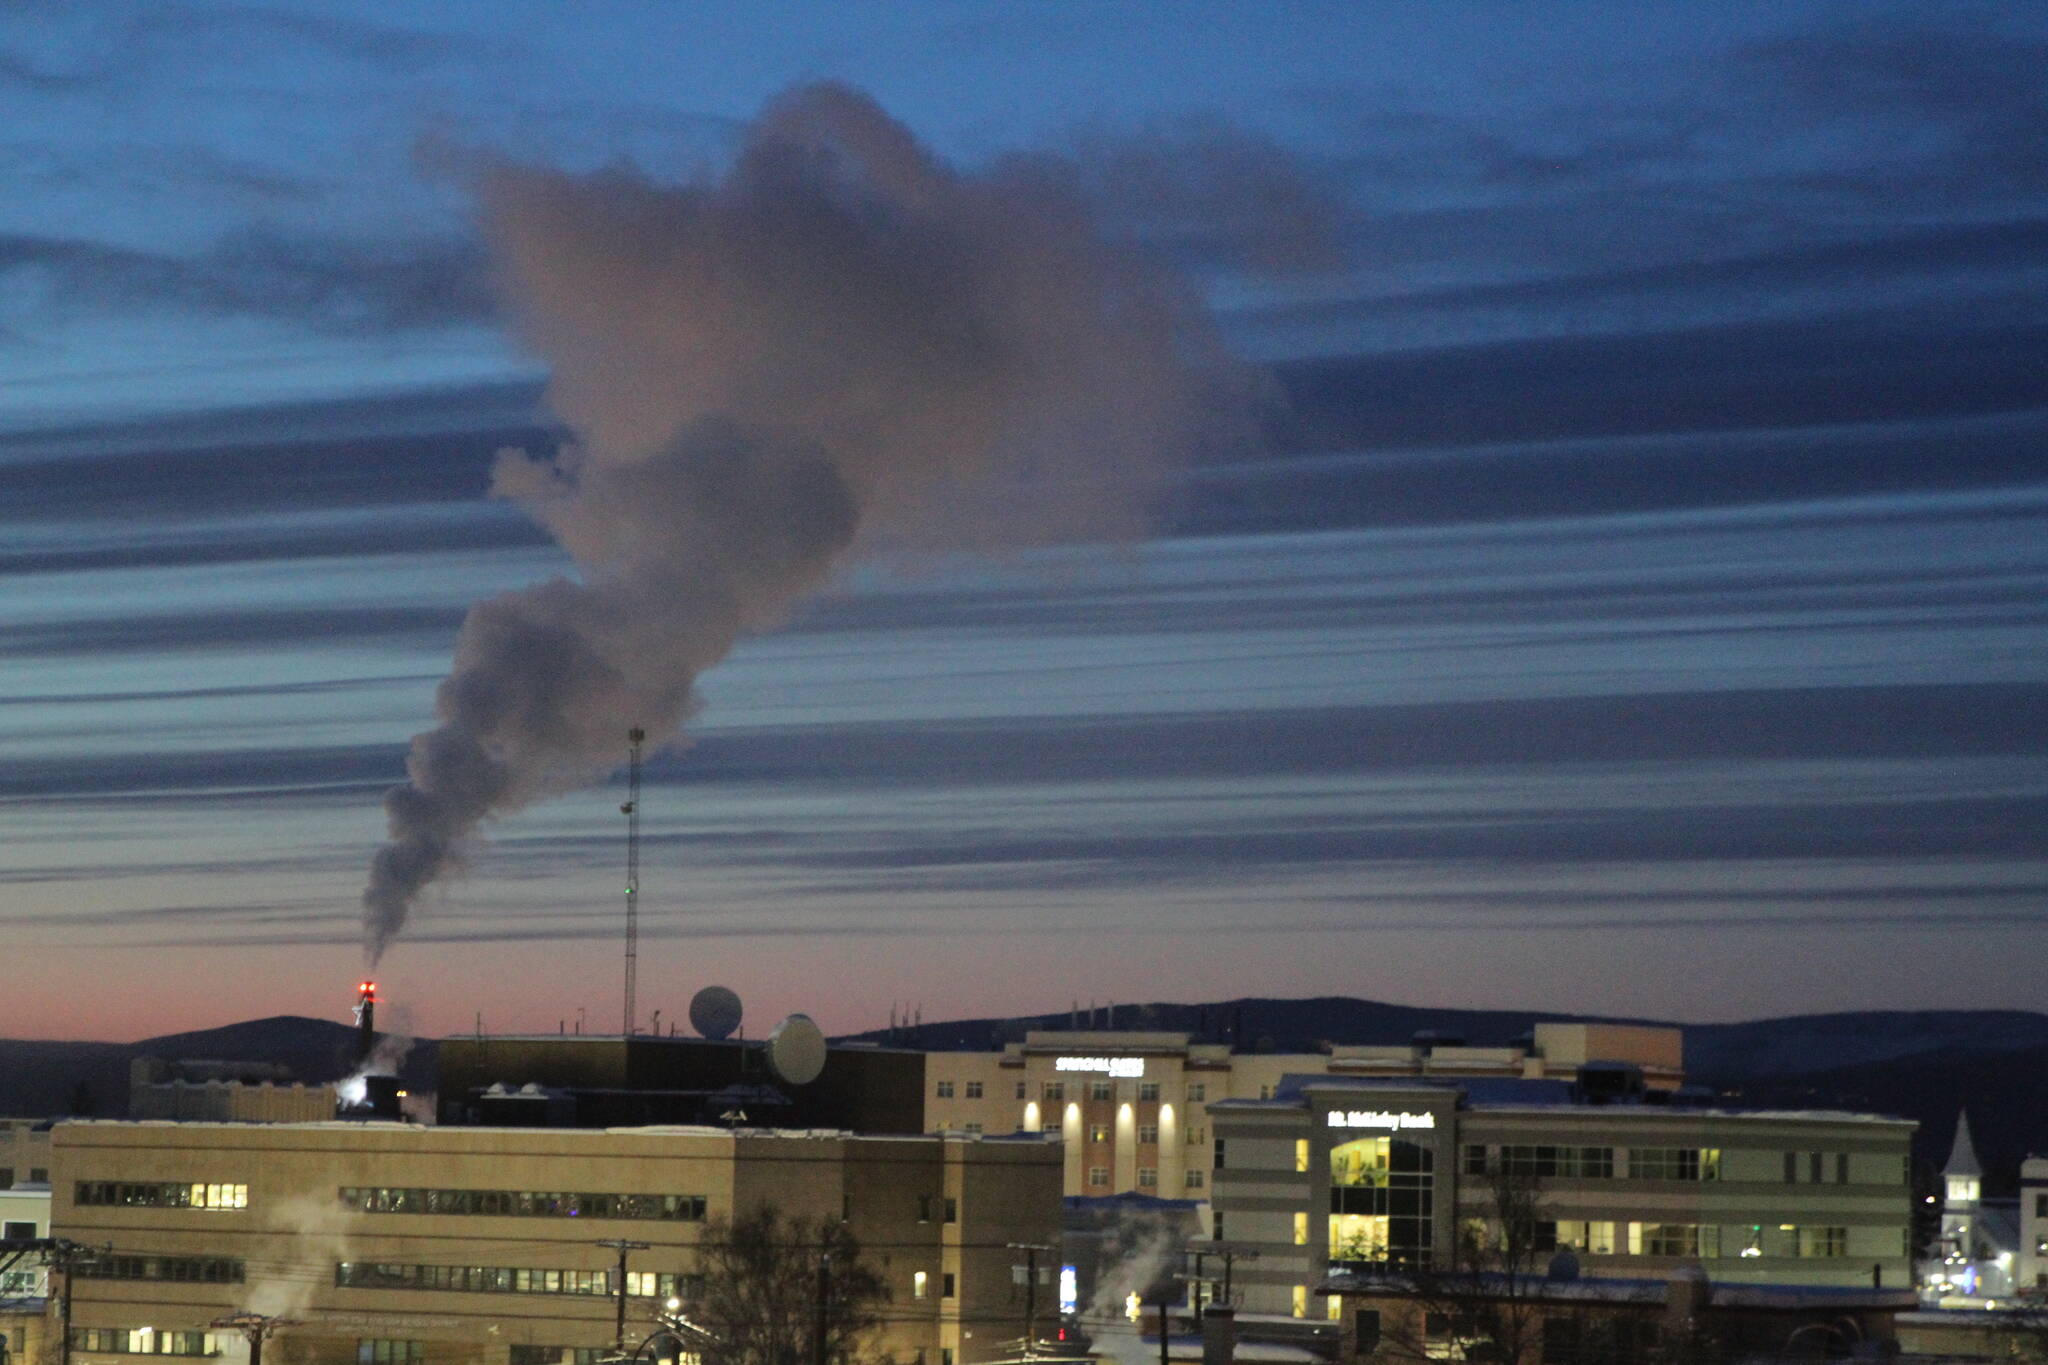 This Feb. 16, 2022, photo shows a plume of smoke being emitted into the air from a power plant in Fairbanks, Alaska, which has some of the worst polluted winter air in the United States. Over seven weeks this winter, nearly 50 scientists from the continental U.S. and Europe descended on Fairbanks to study the sources of air pollution. (AP Photo/Mark Thiessen)